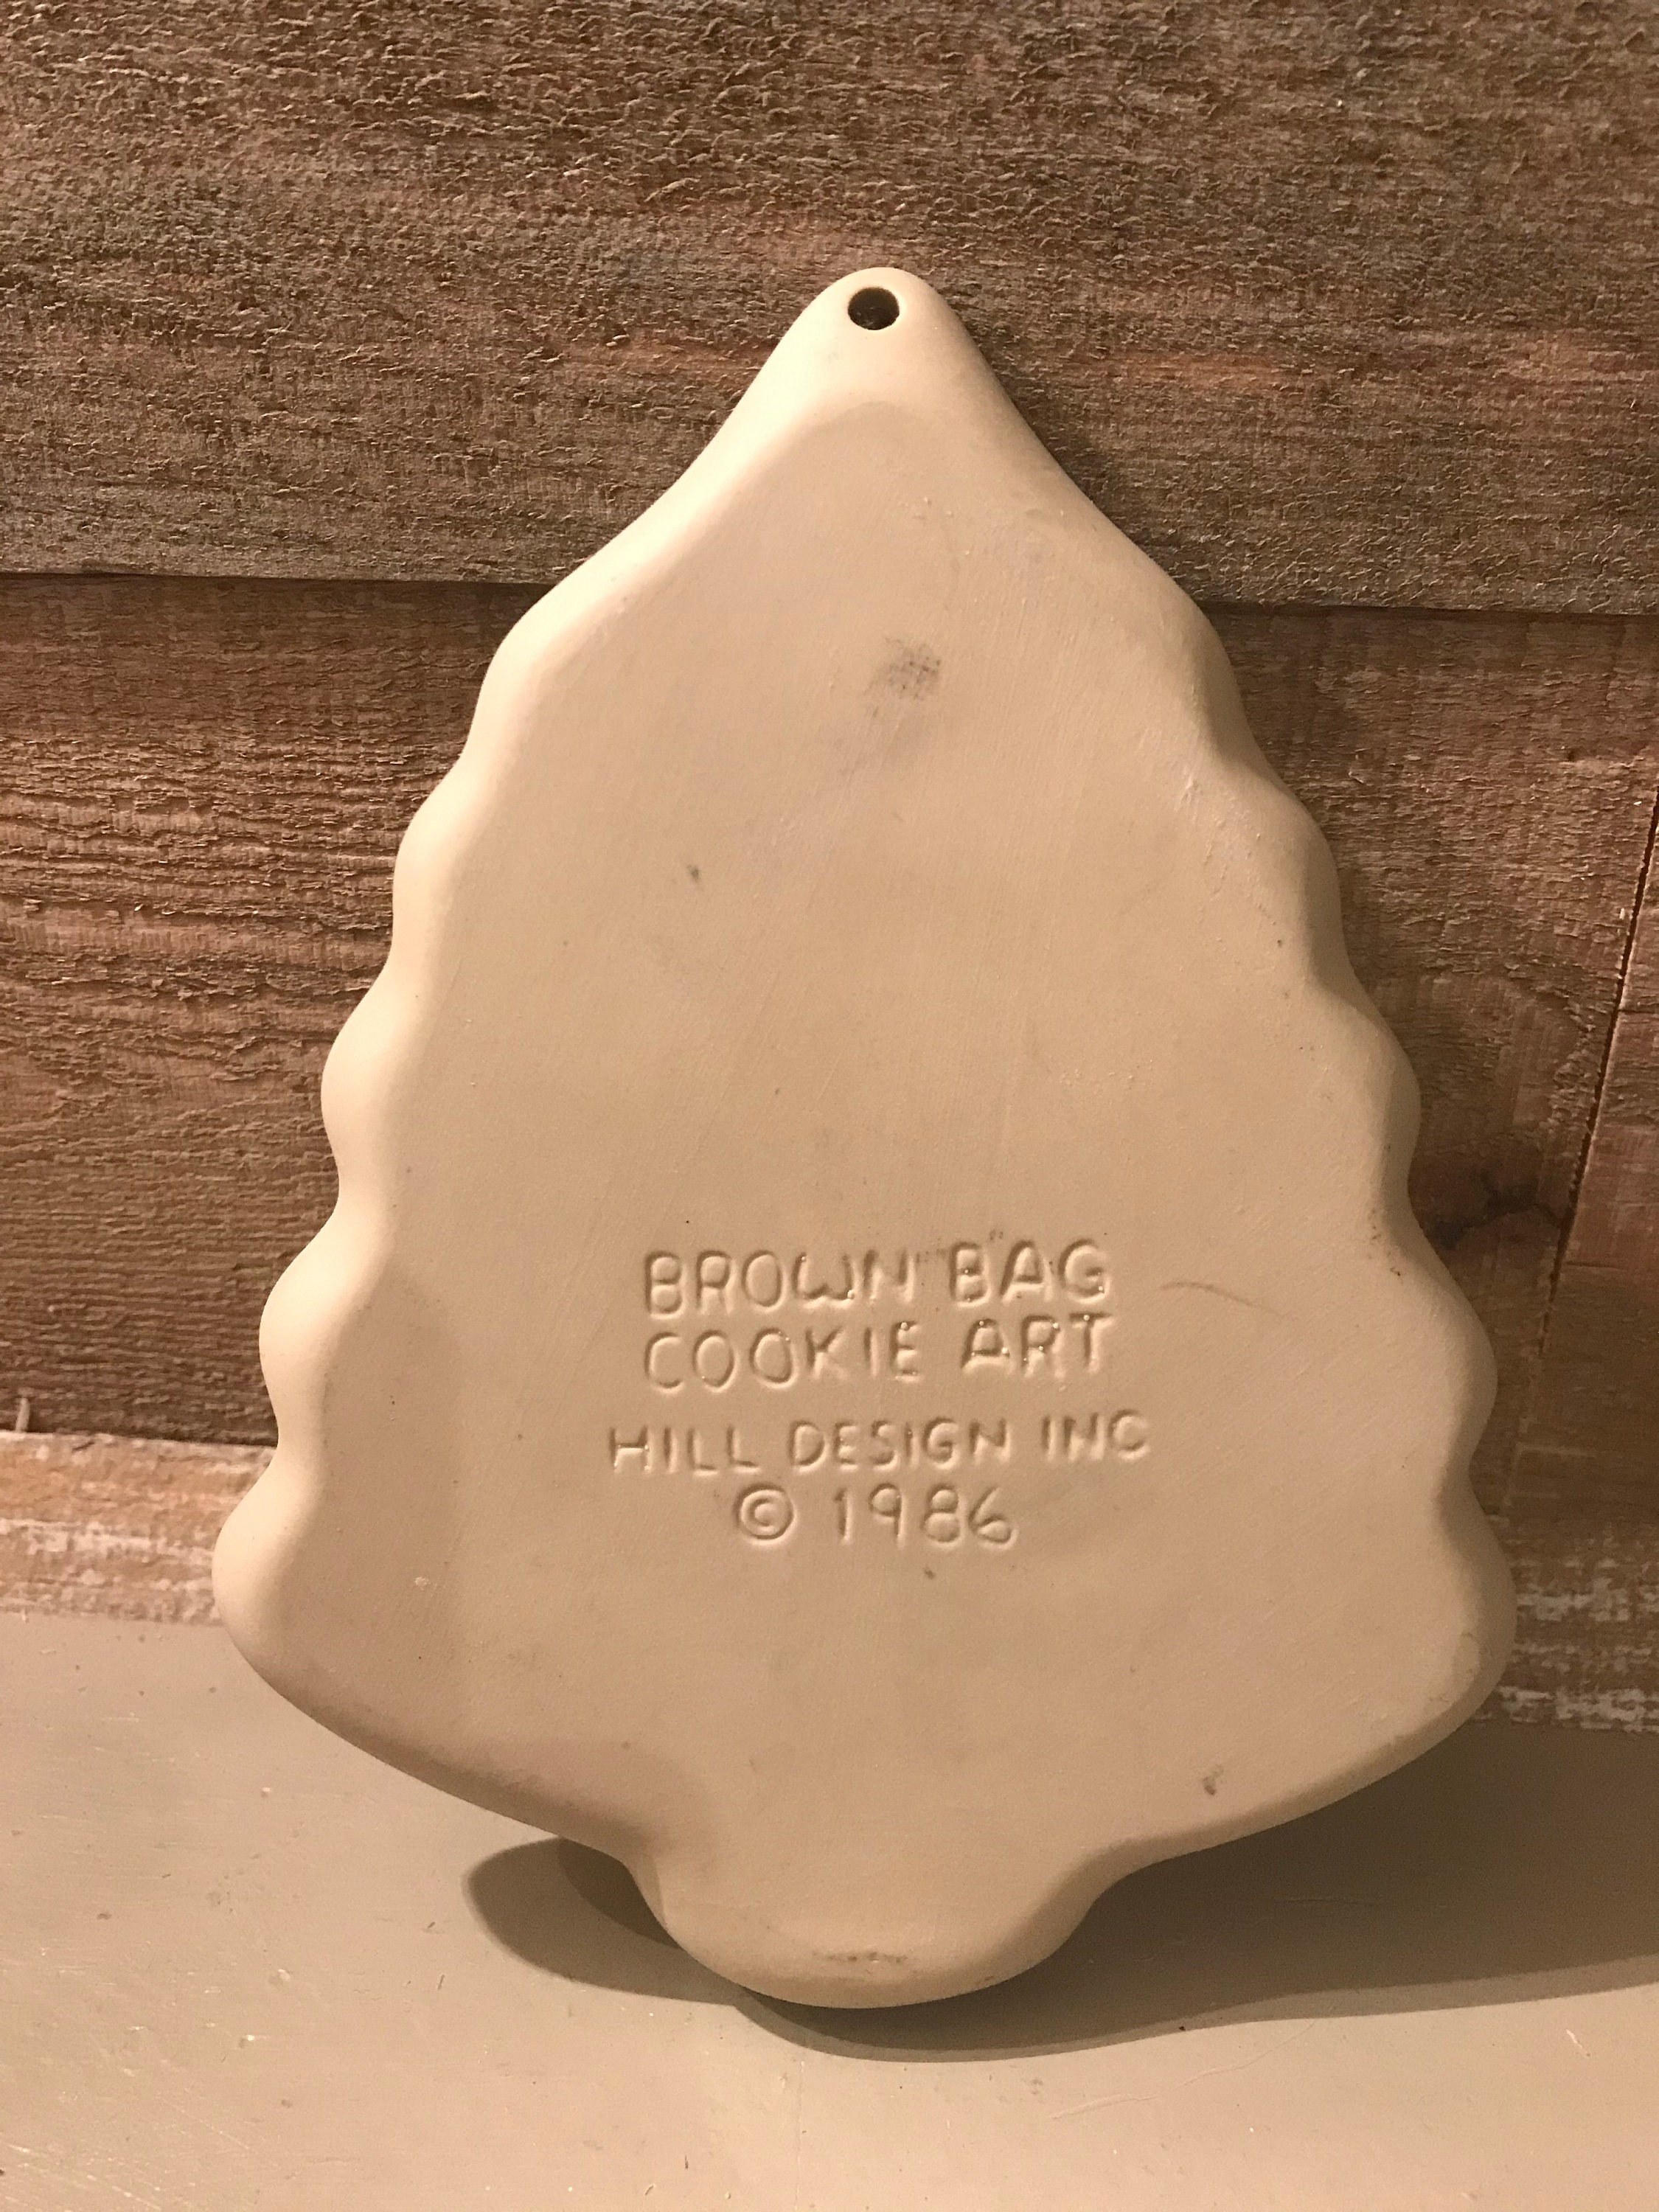 Cookie Molds from 1991 – Brown Bag Cookie Molds